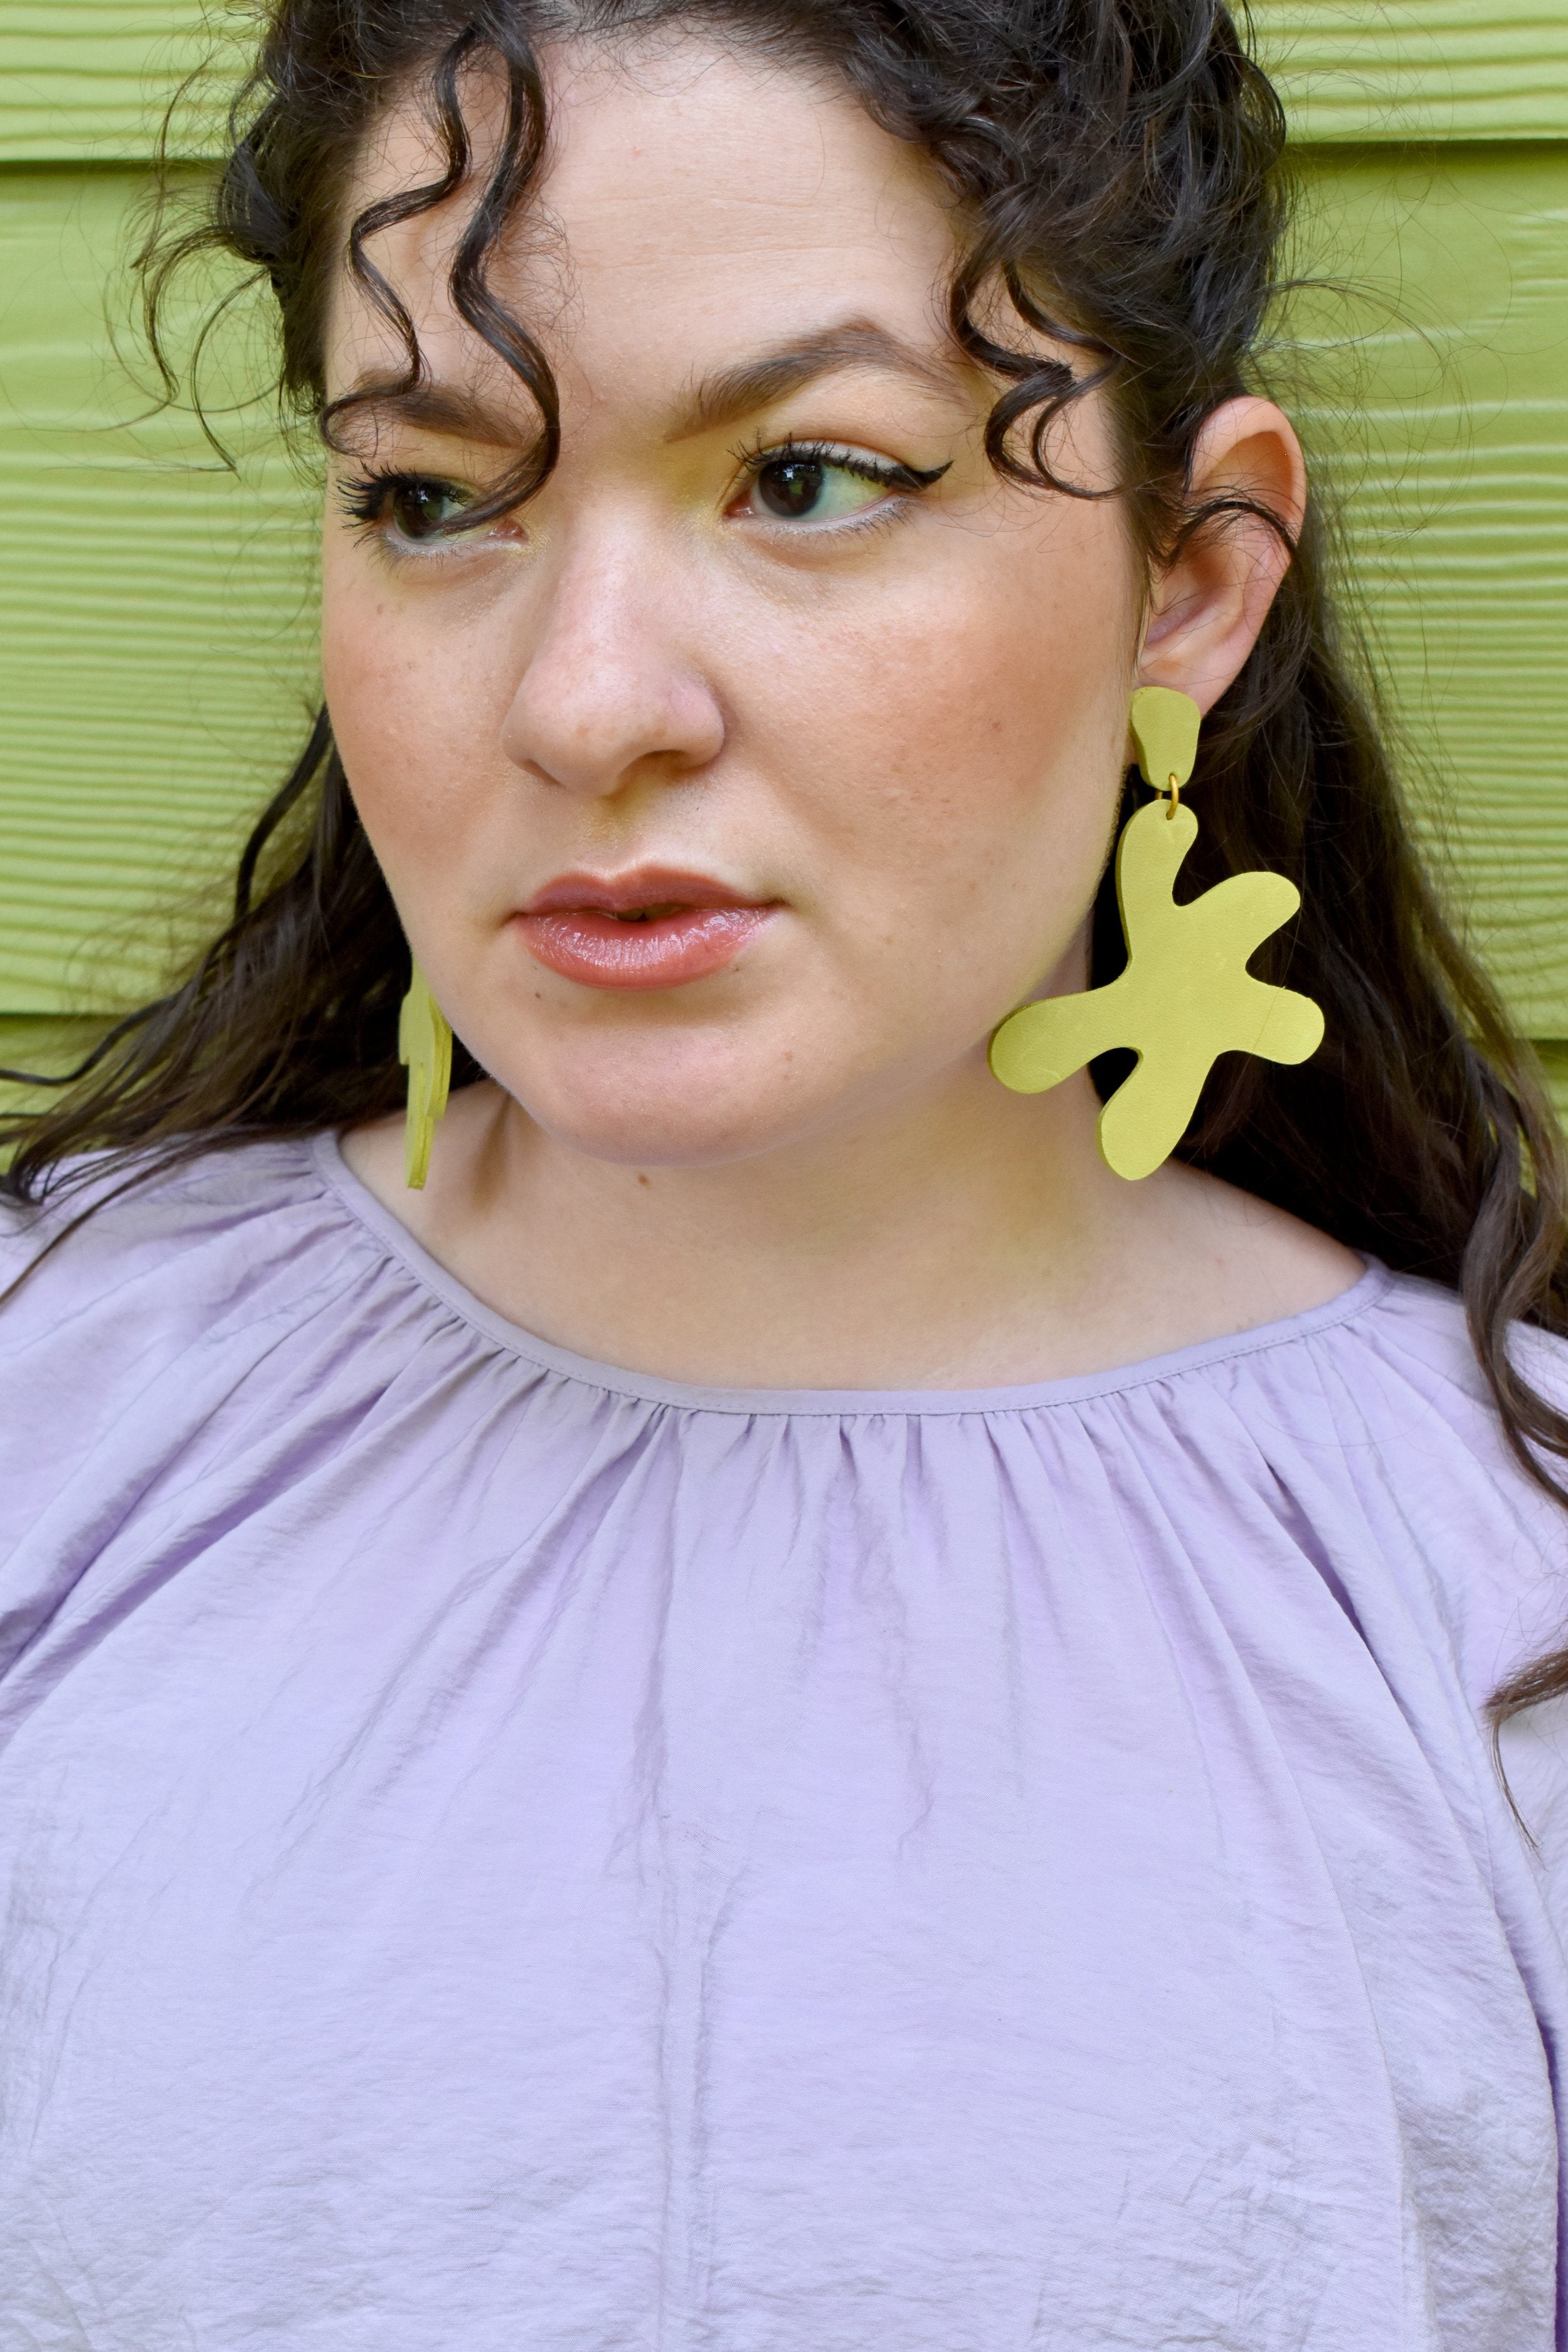 lime green matisse inspired leather statement earrings on a young woman